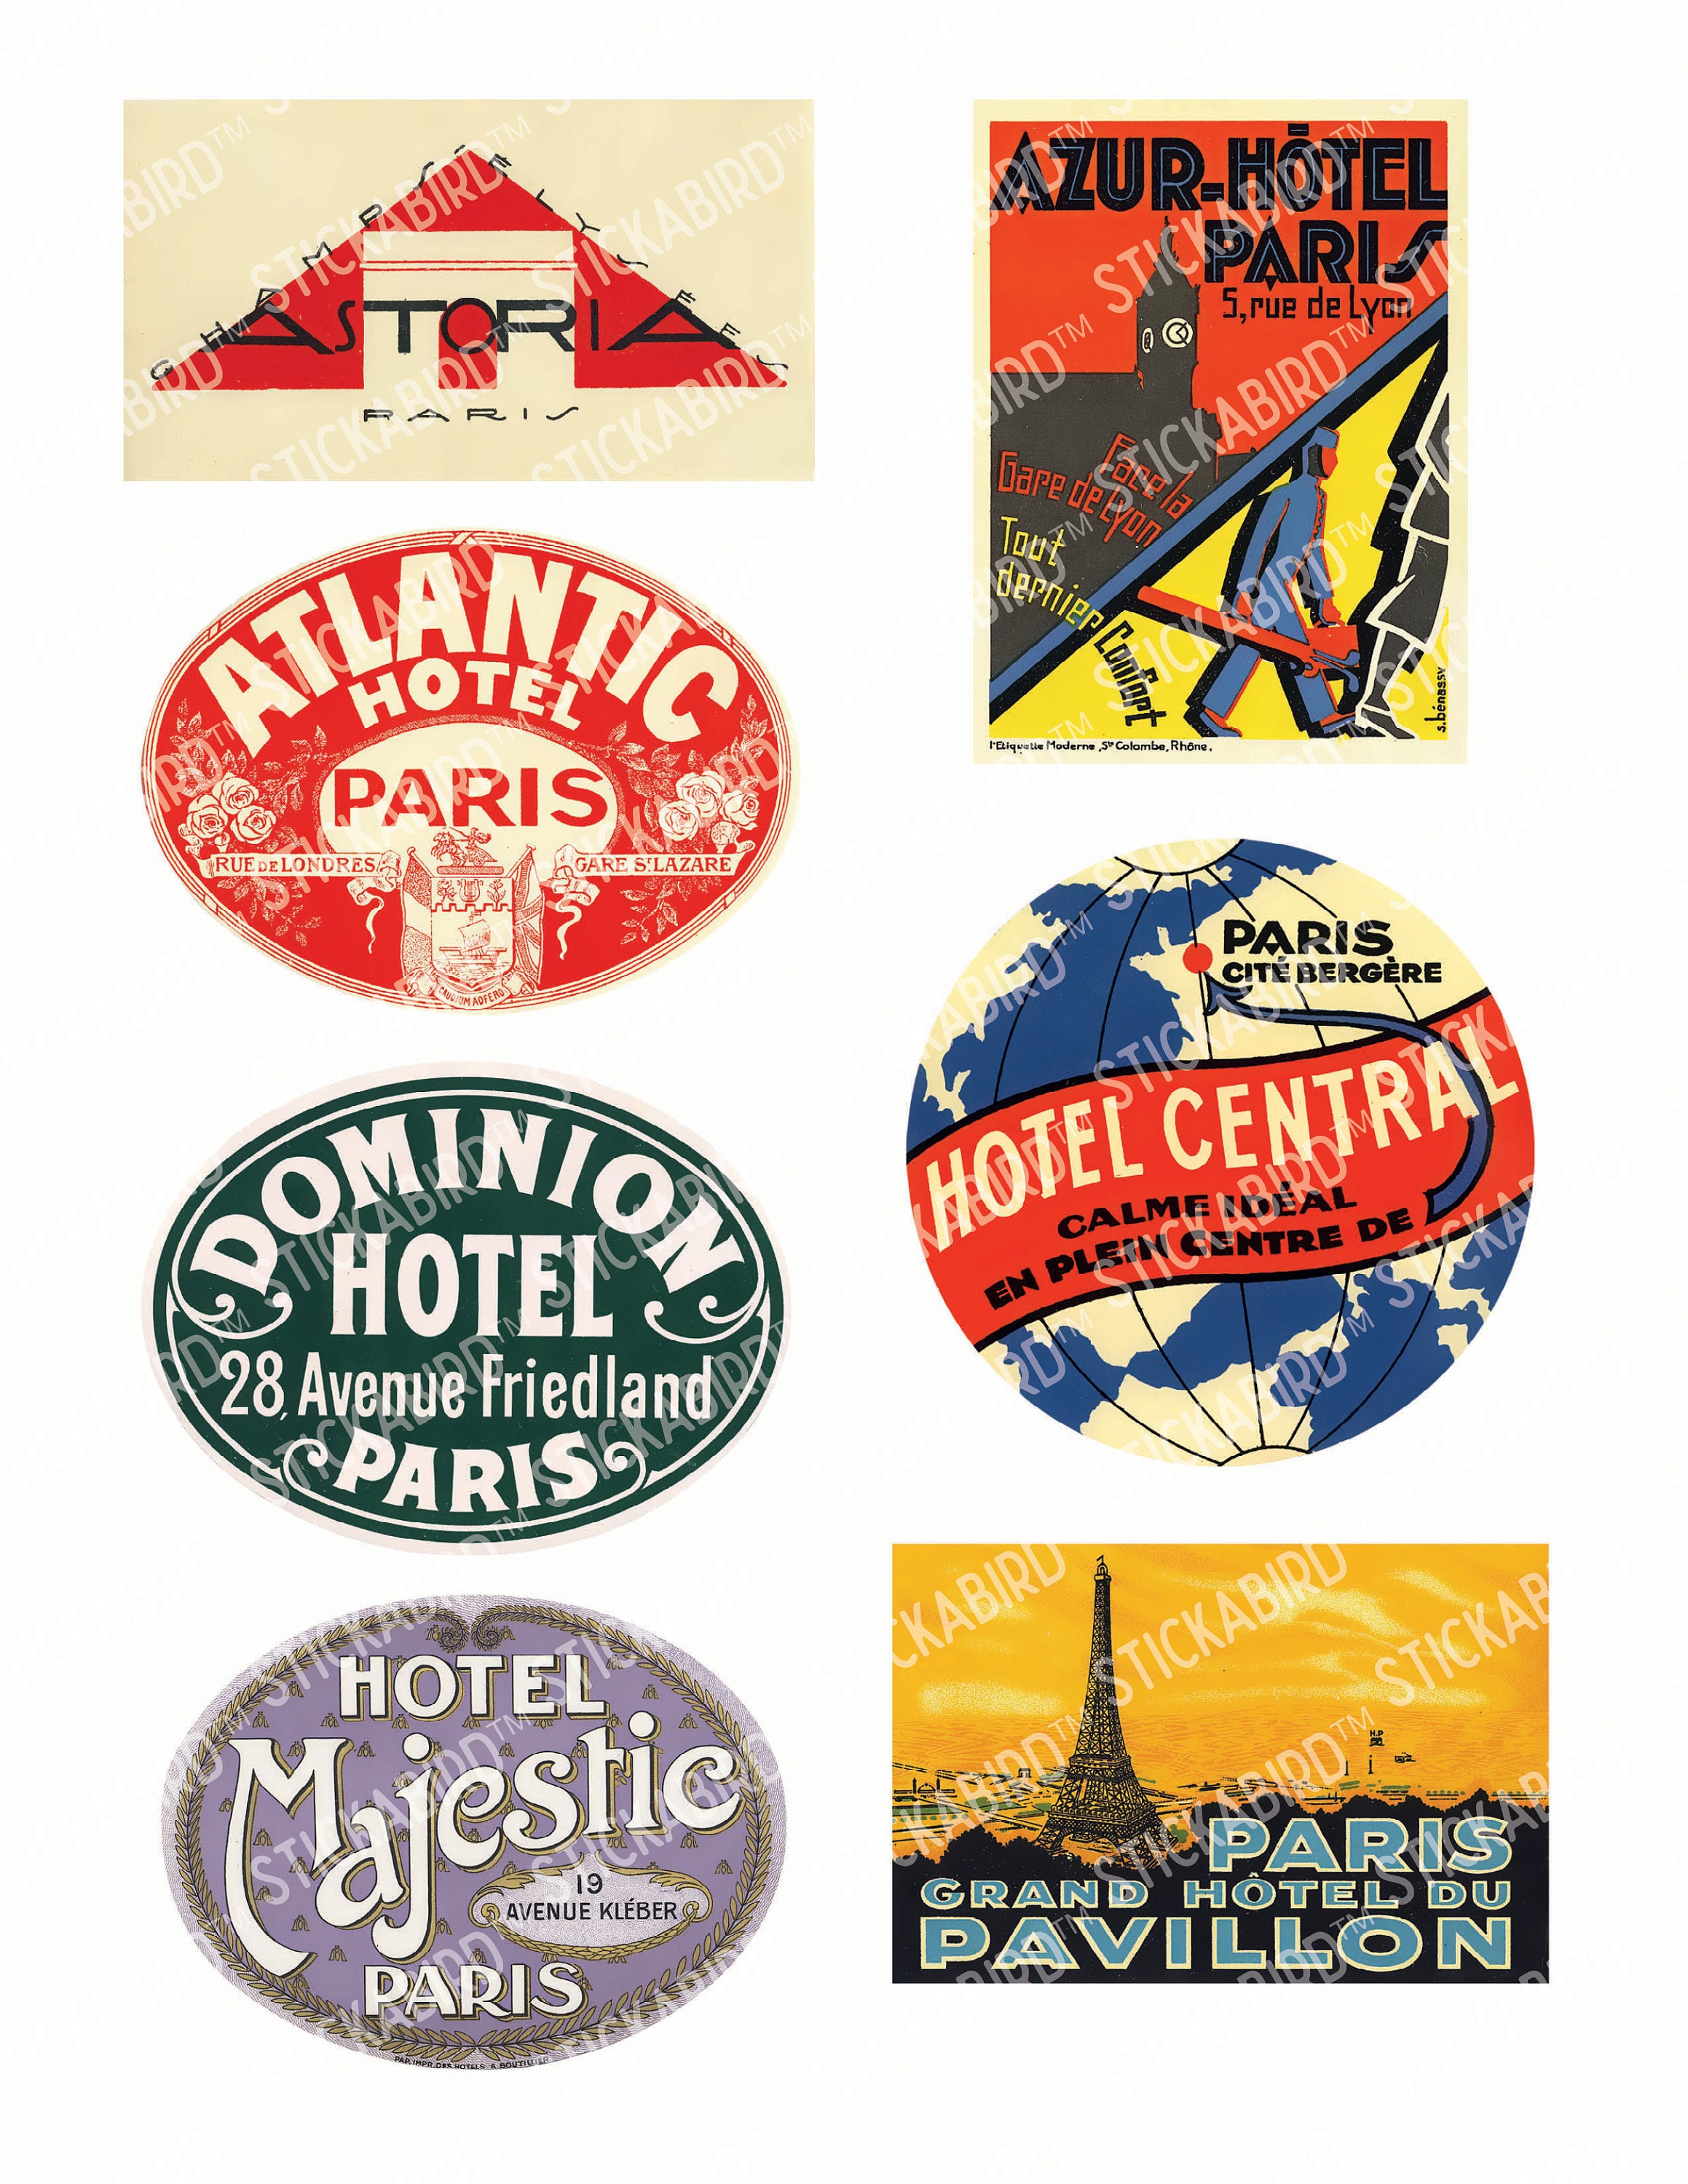 Paris France Hotel Luggage Label Sticker - Baggage Label, Suitcase Sticker,  Vintage French Travel Trunk Decal, 4 x 3  Authentic Size, D15